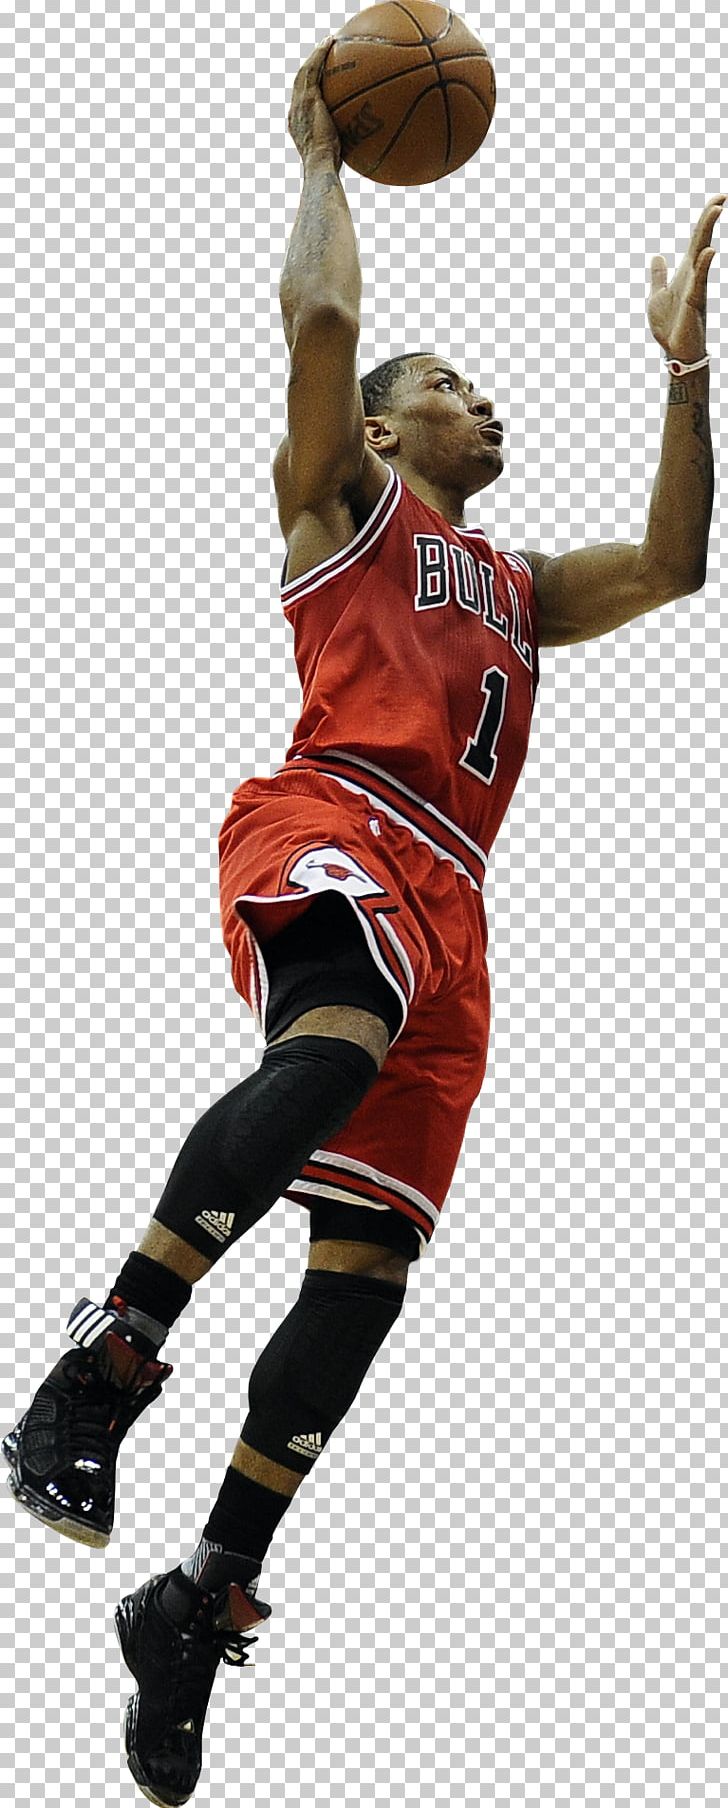 Insomnia Pat Williams Sleep Chicago Bulls PNG, Clipart, Basketball Player, Chet Walker, Chicago Bulls, Depression, Insomnia Free PNG Download